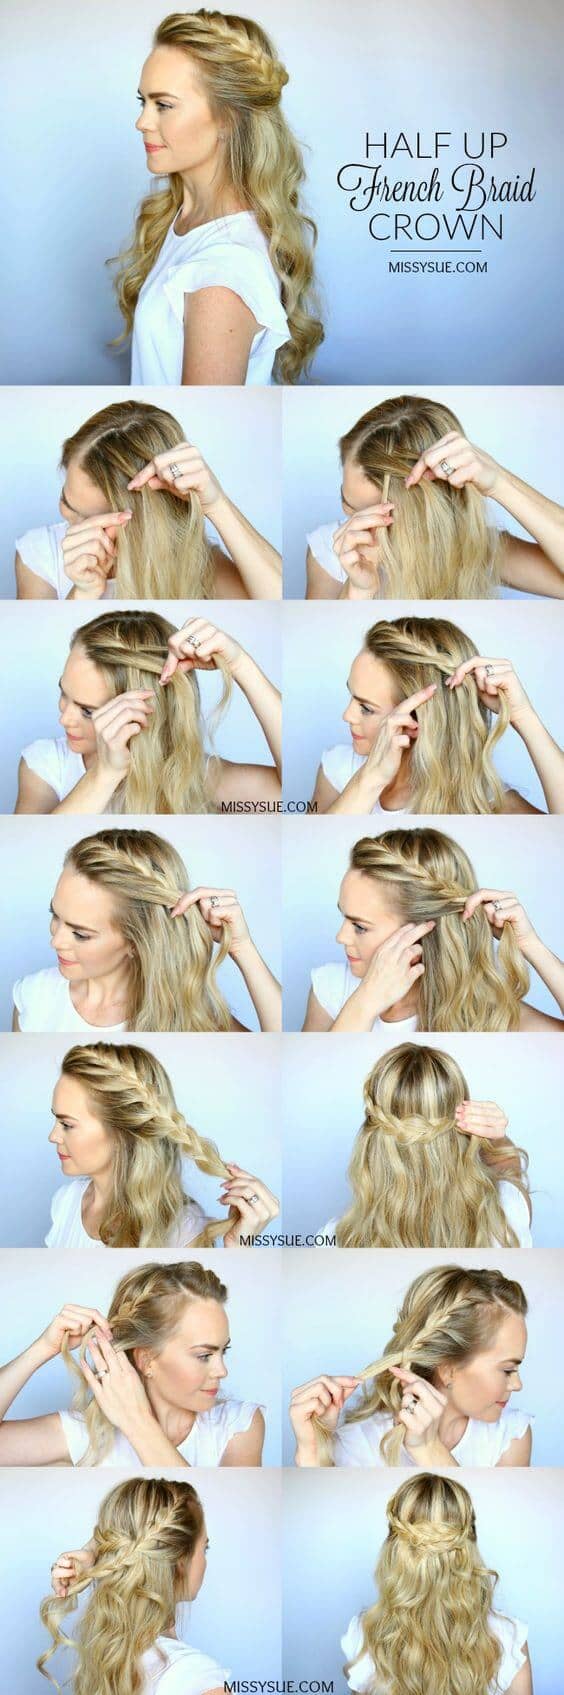 27 Magnificently Gorgeous Half Up Half Down Hairstyles